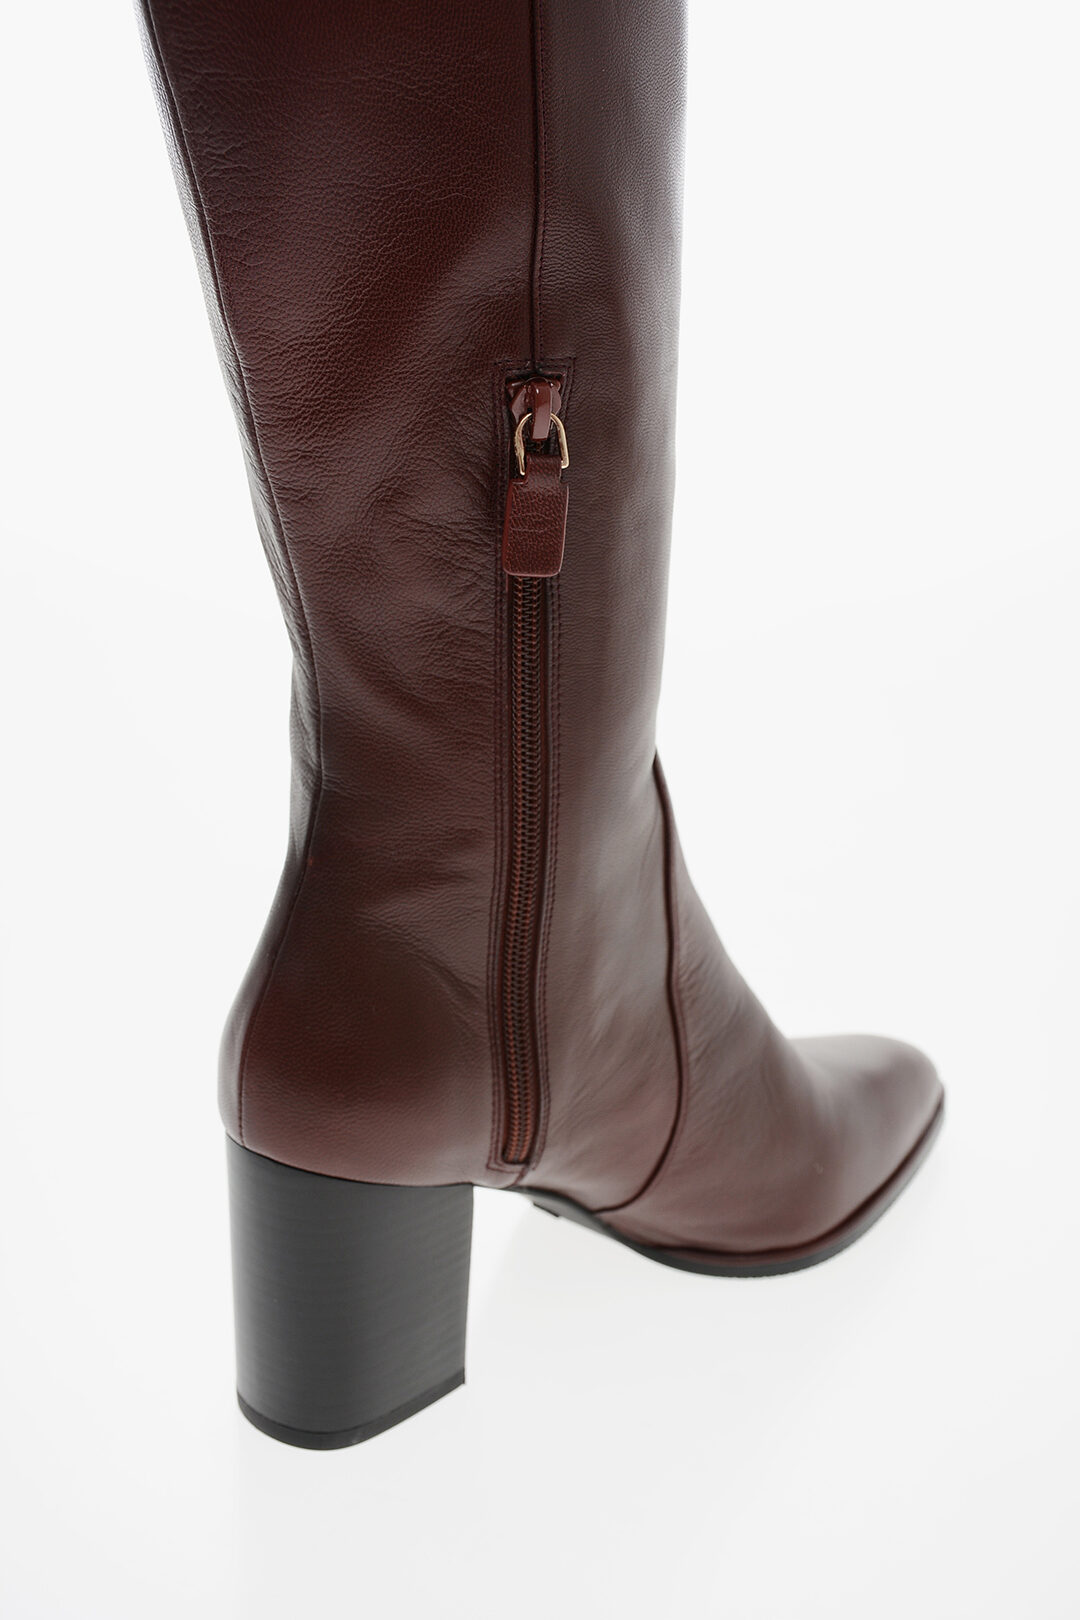 Easy Street Womens Jewel Stacked Heel Riding Boots, Color: Brown - JCPenney